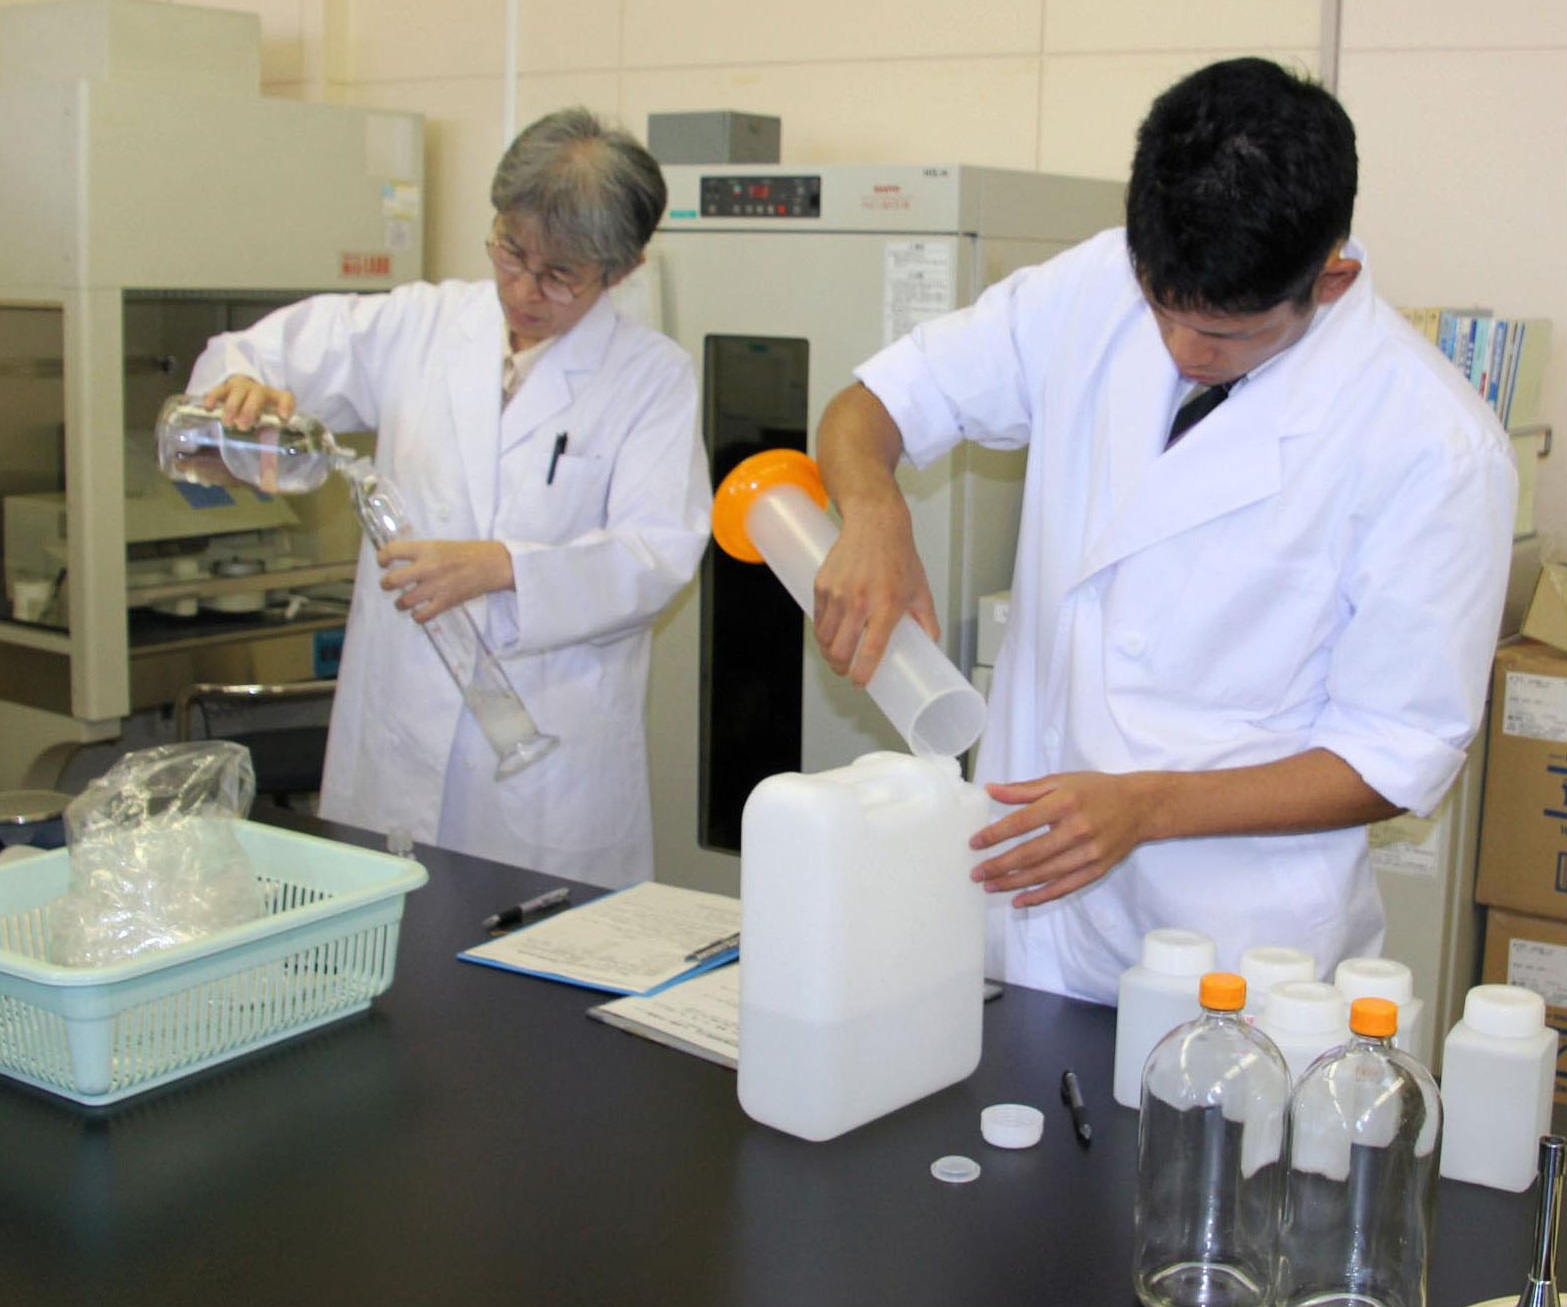 Pharmacists in Nagaoka, Niigata Prefecture, prepare iodine solutions for children during a drill on Tuesday aimed at assuring residents' safety in the event of a radiation leak at the nearby Kashiwazaki-Kariwa nuclear plant. | KYODO